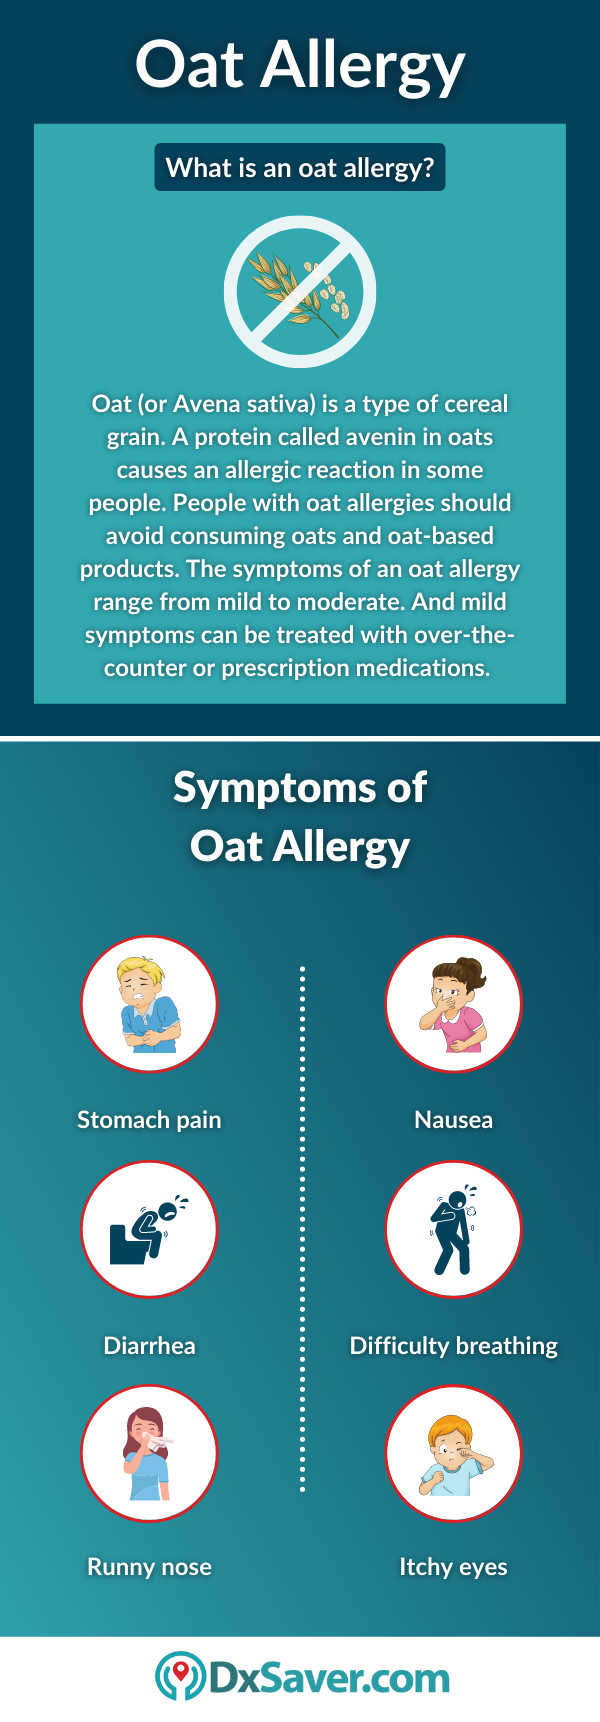 Oat Allergy and its Symptoms